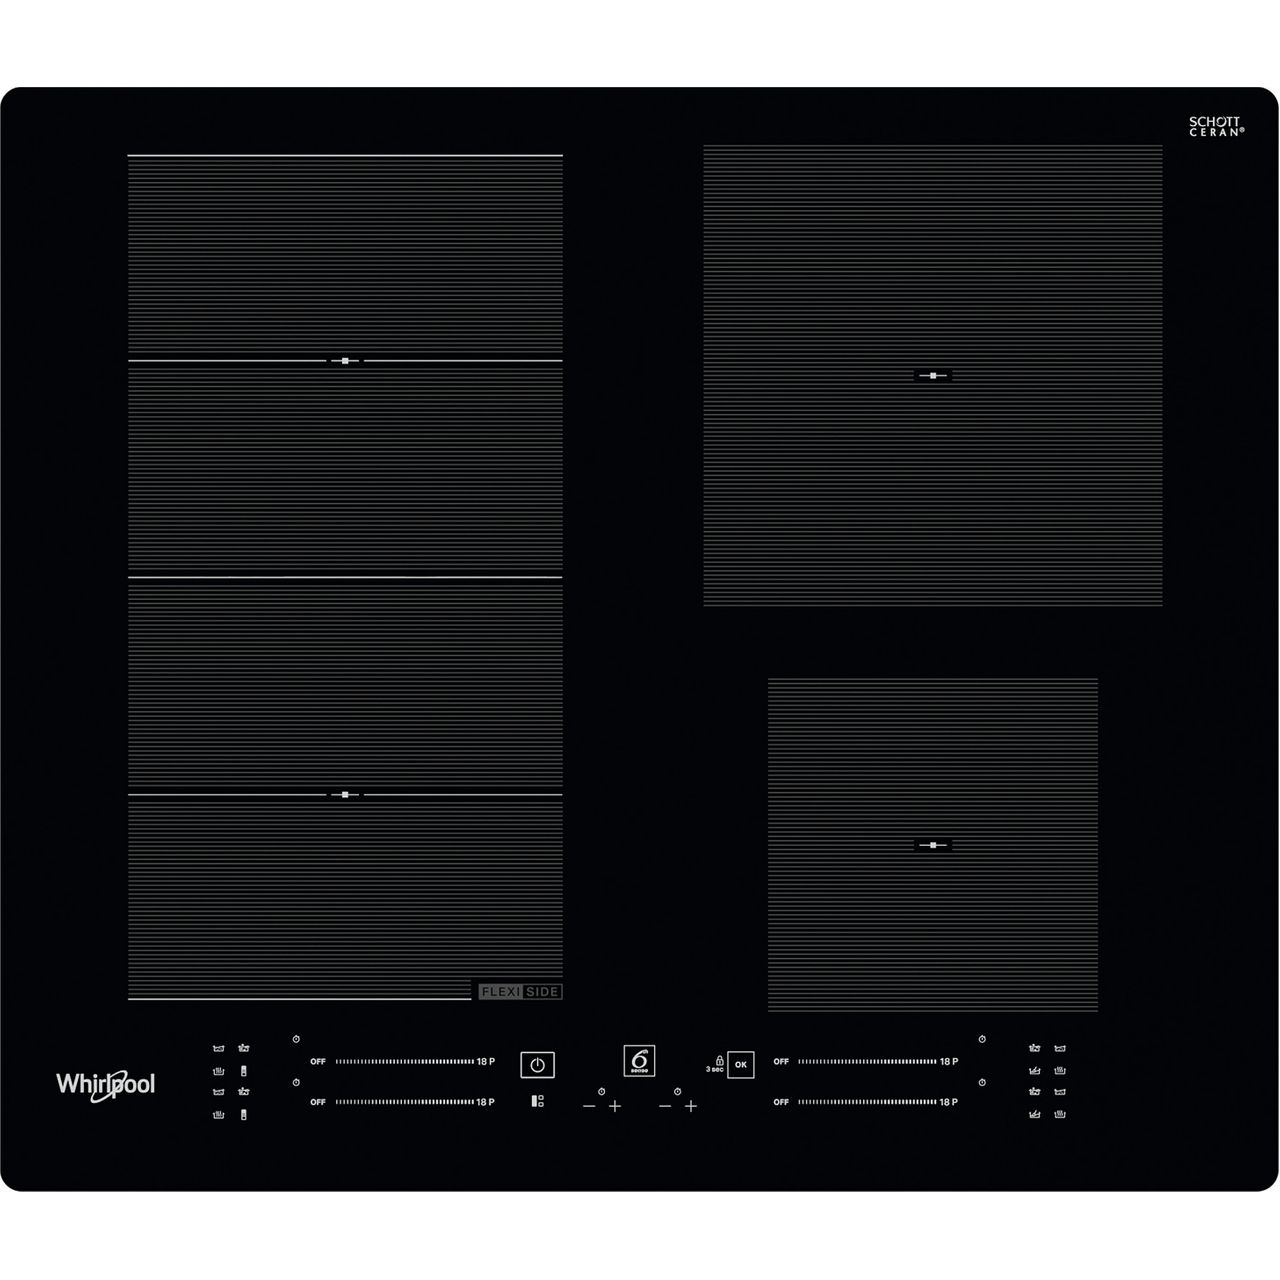 Whirlpool WFS0160NE 59cm Induction Hob Review